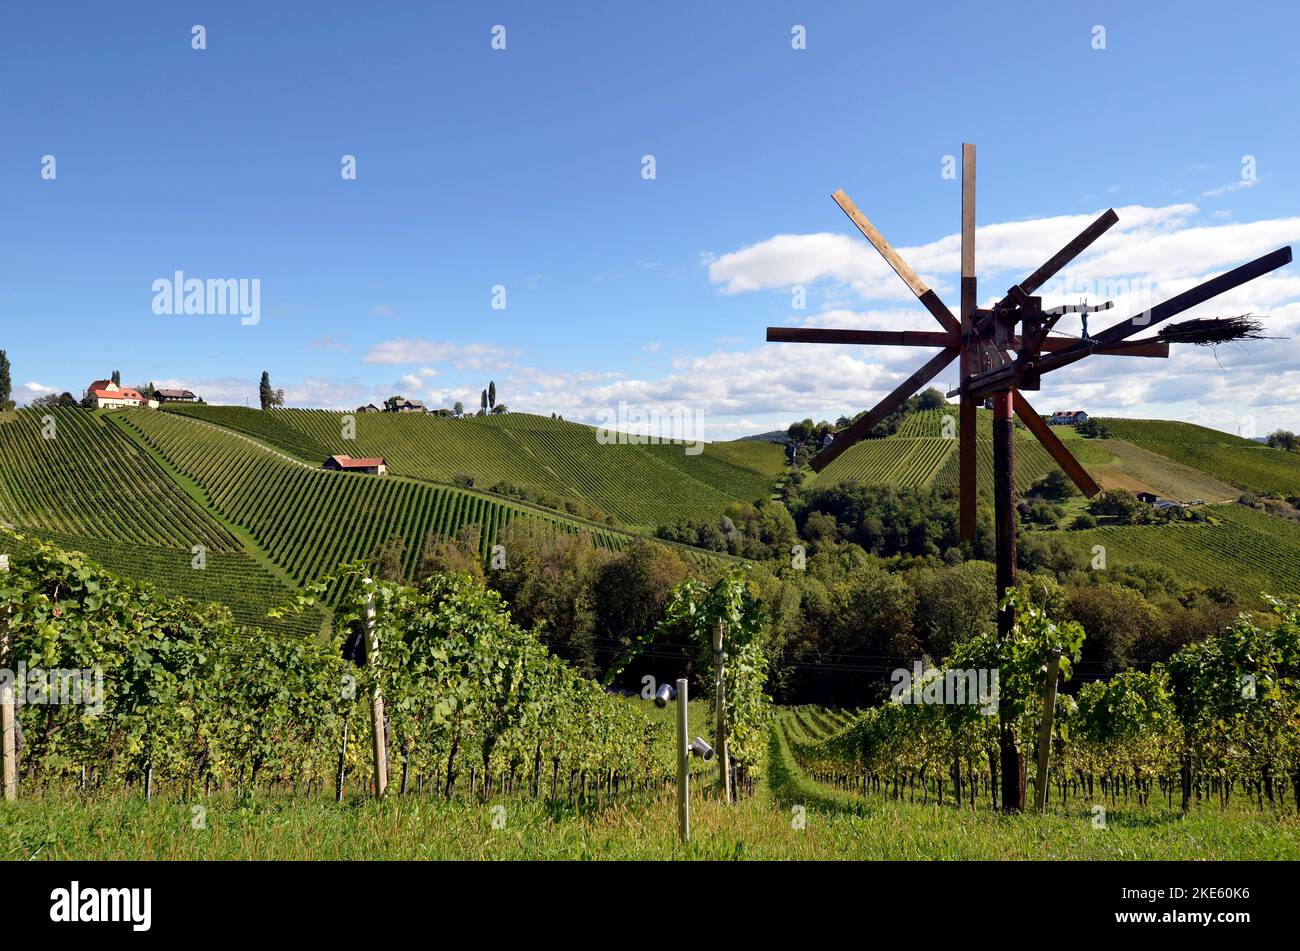 Austria, traditional Klapotez scarecrow and vineyards on the steep slopes located on the Styrian wine route, the hilly landscape is also known as the Stock Photo